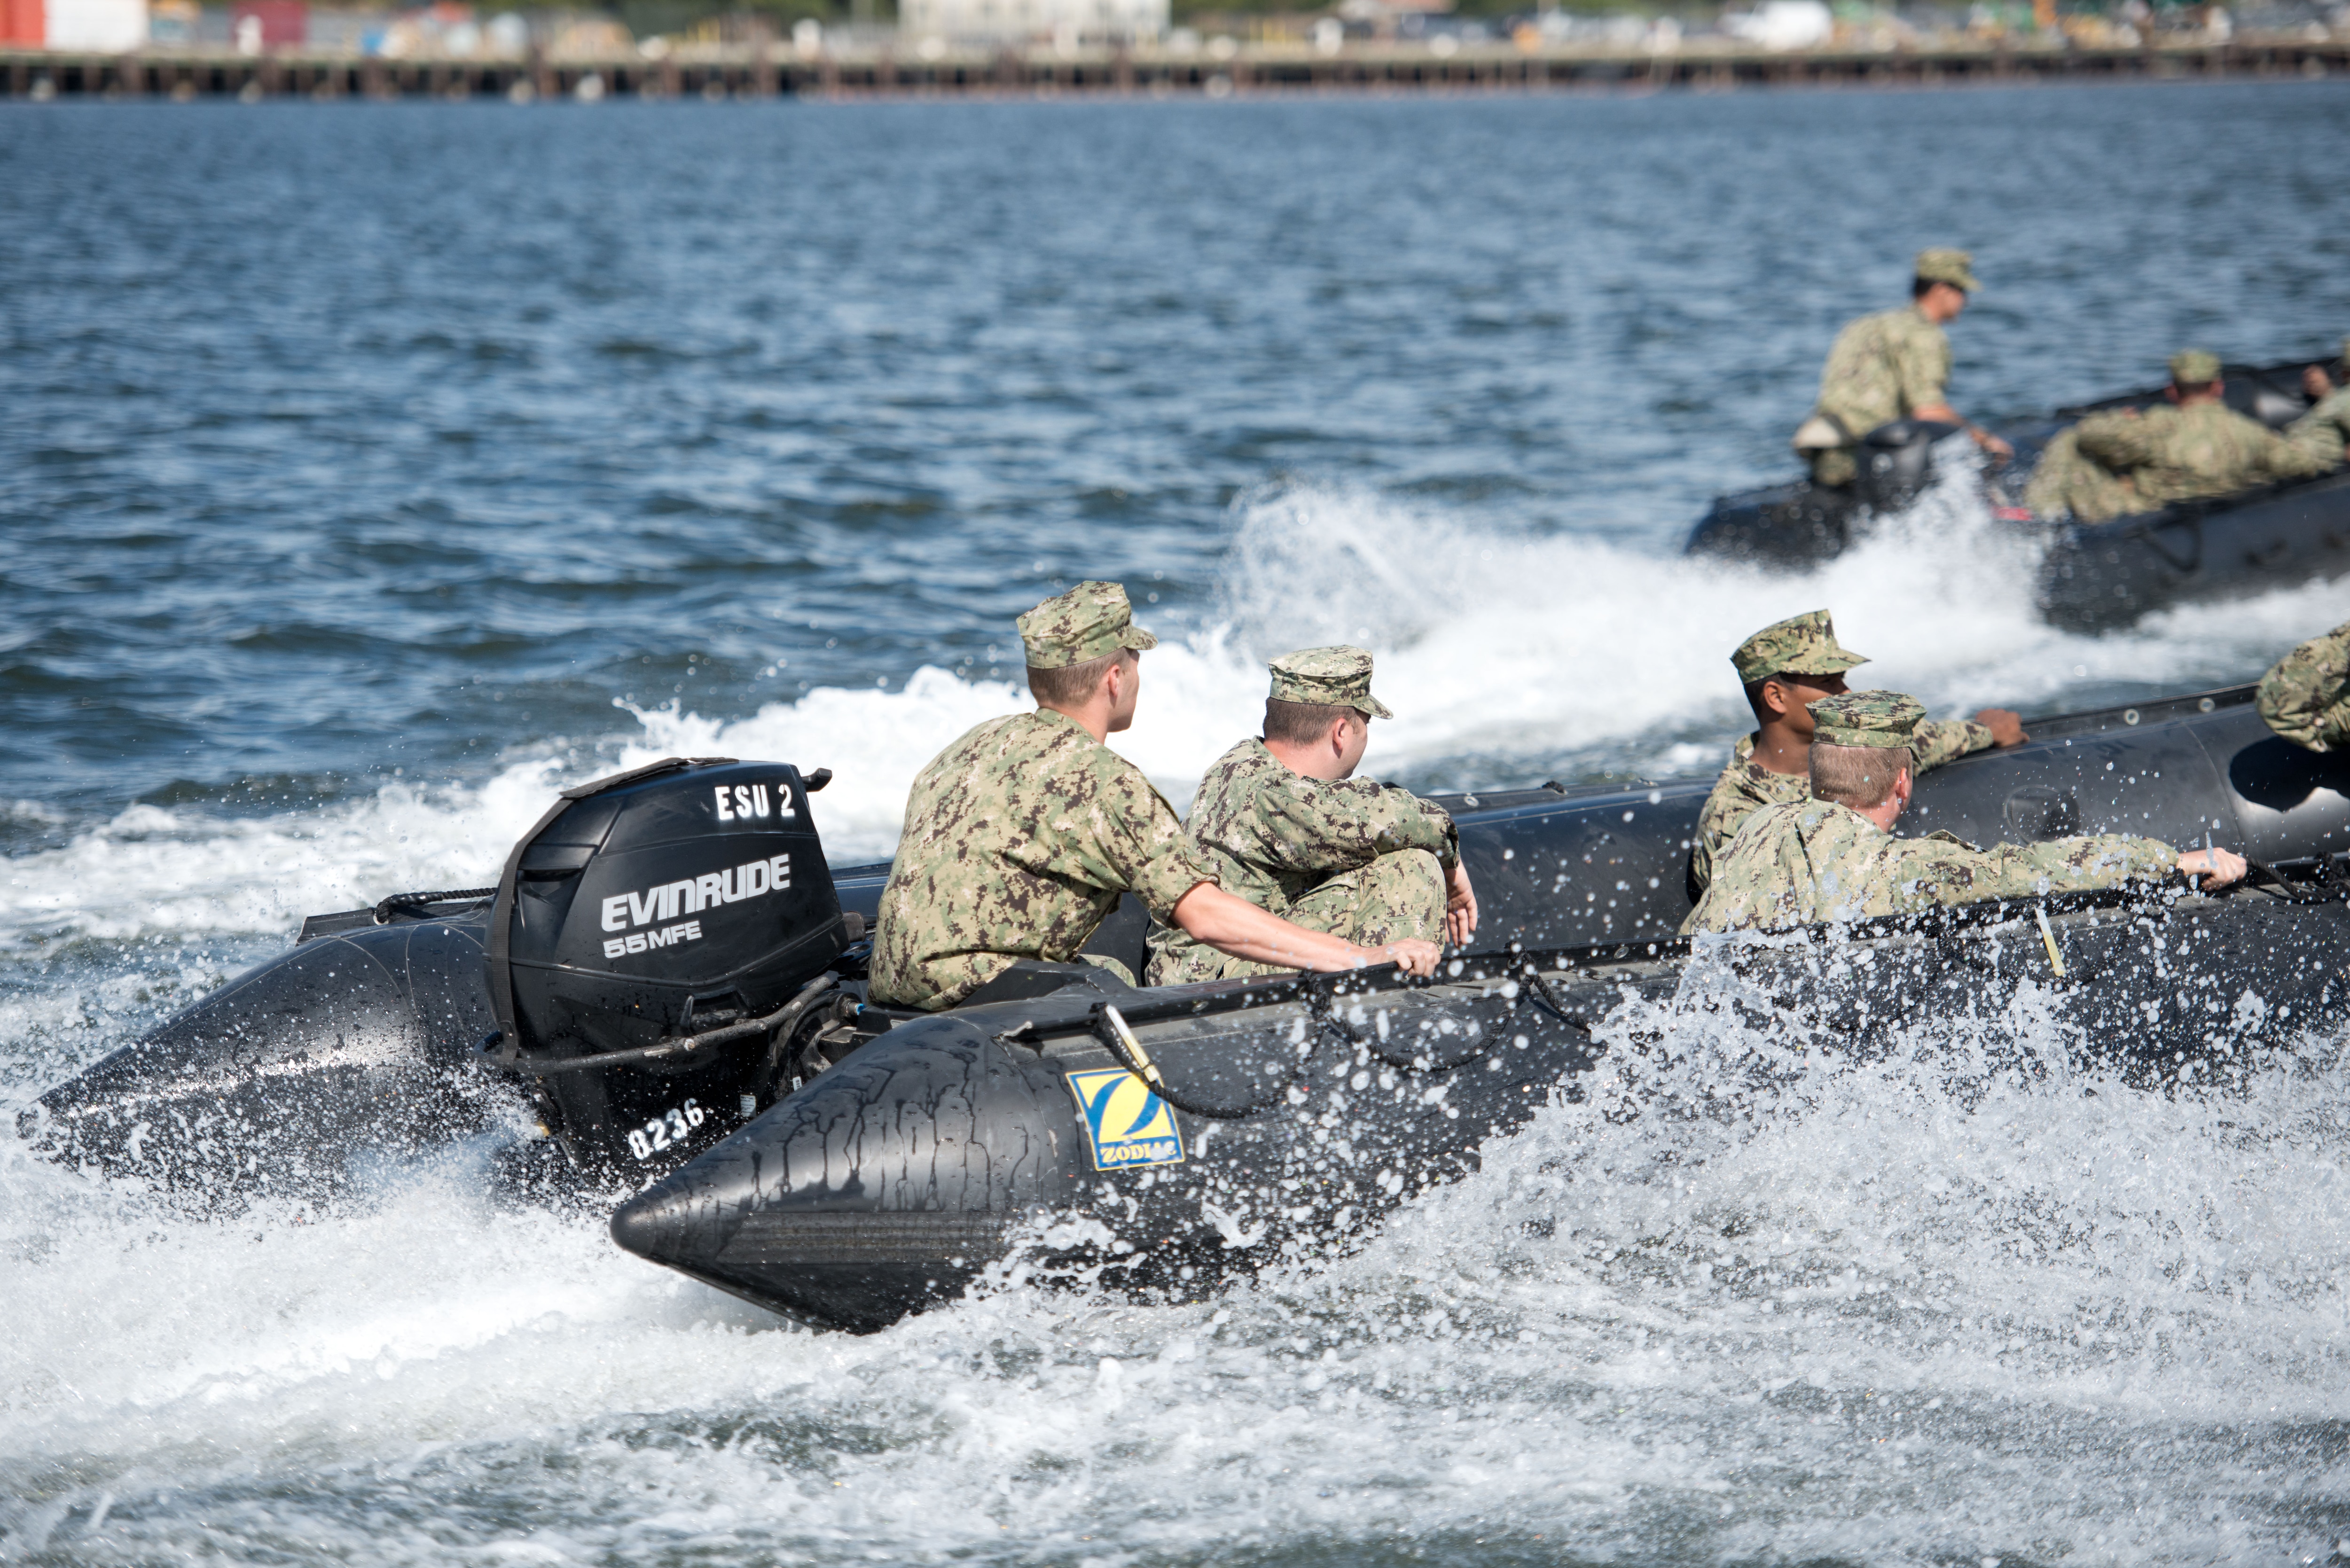 Military personnel in a boat yielding an Evinrude motor